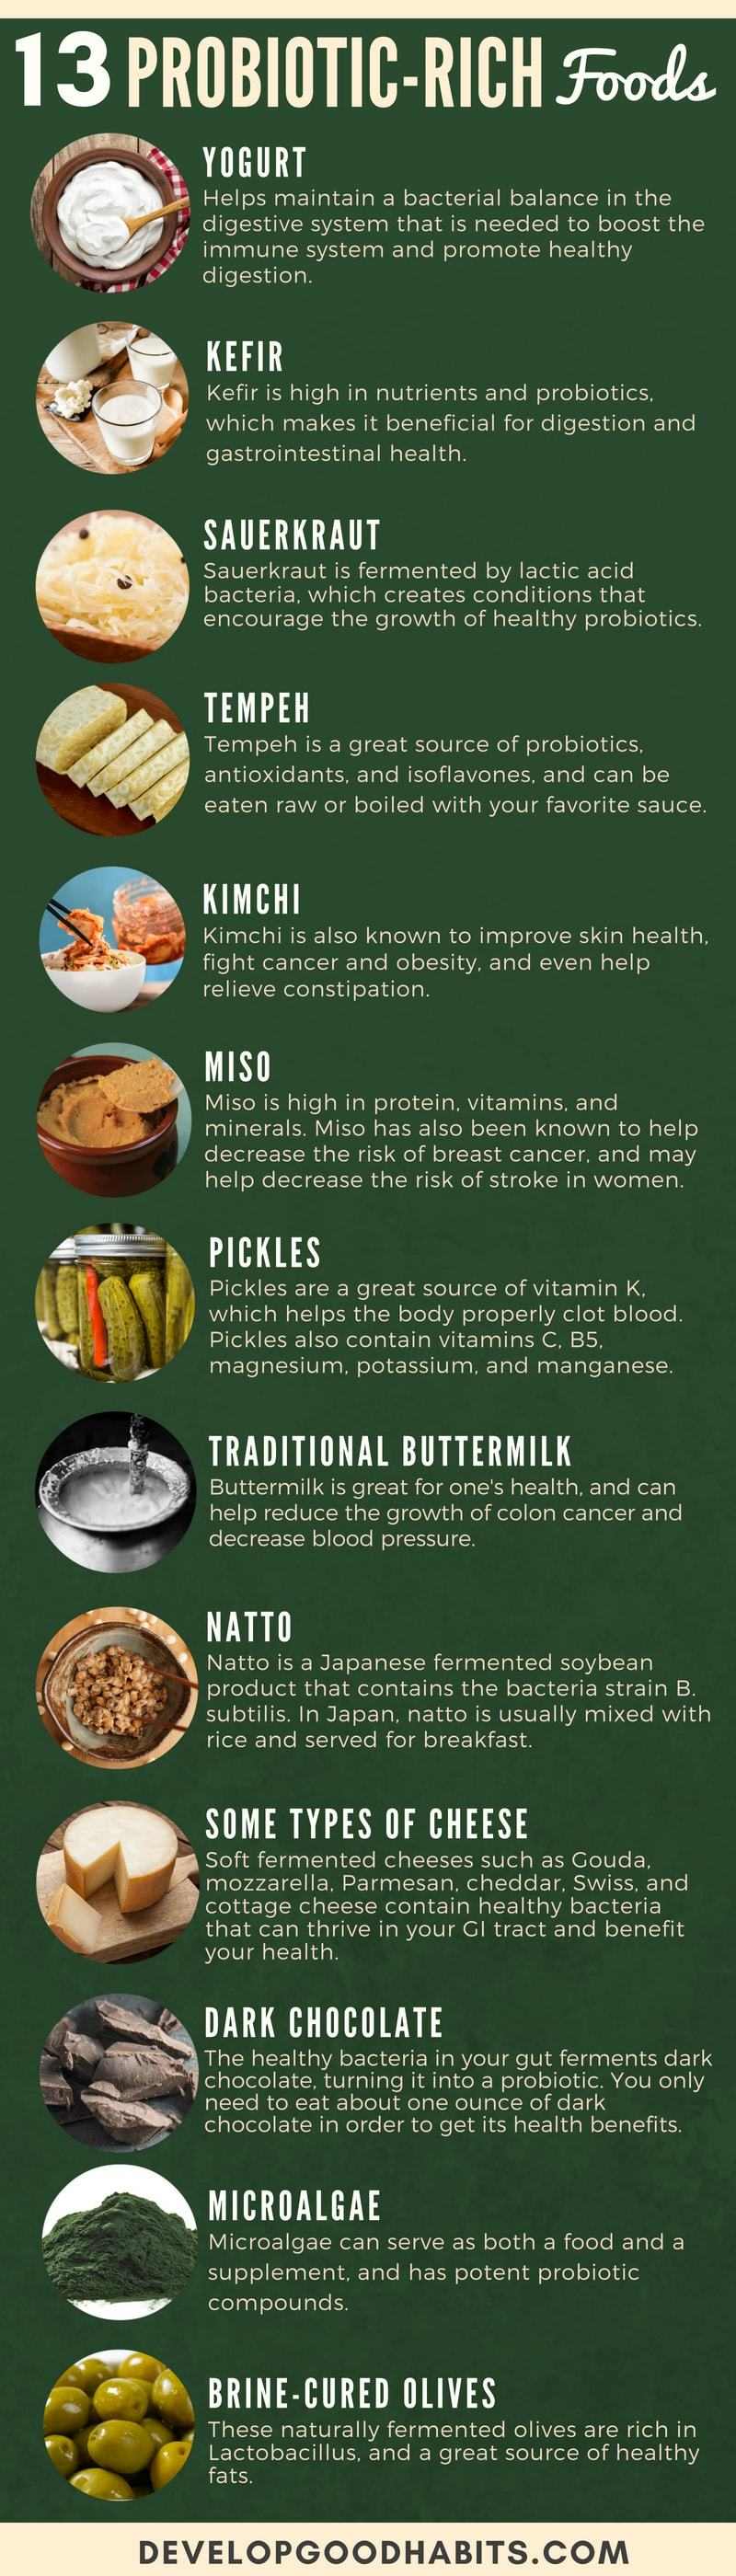 With this list of 13 foods that are good sources of probiotics, you can make it a habit to include at least one or two in your meal plan.